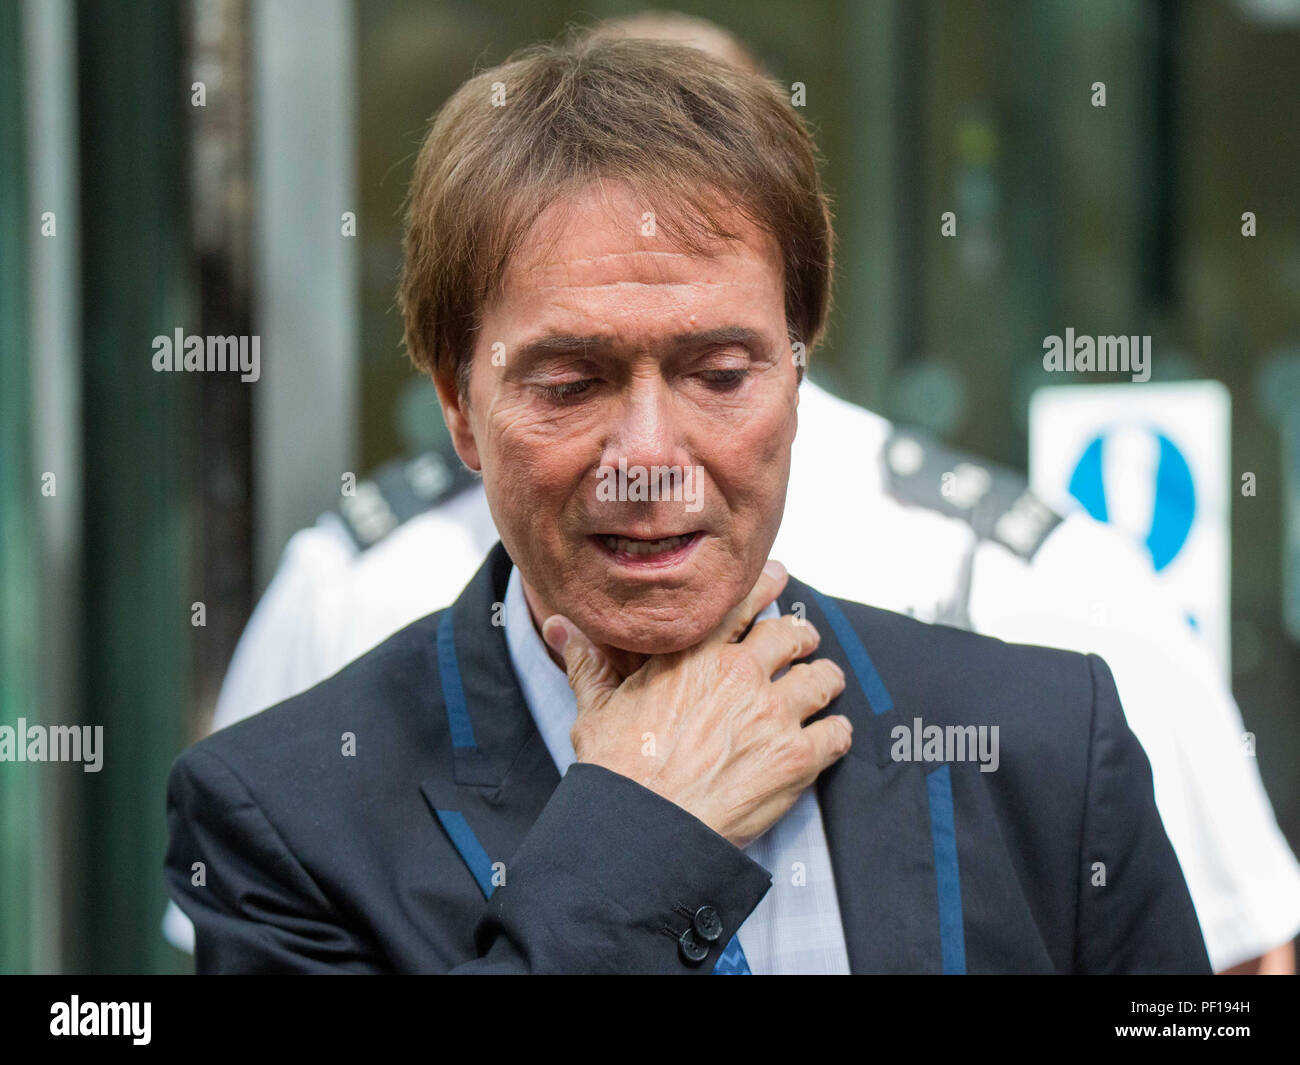 Sir Cliff Richard, former singer, leaves the High Court of Justice winning a ruling for damages from the BBC following coverage of a police raid on his home.  Featuring: Sir Cliff Richard Where: London, England, United Kingdom When: 18 Jul 2018 Credit: Wheatley/WENN Stock Photo